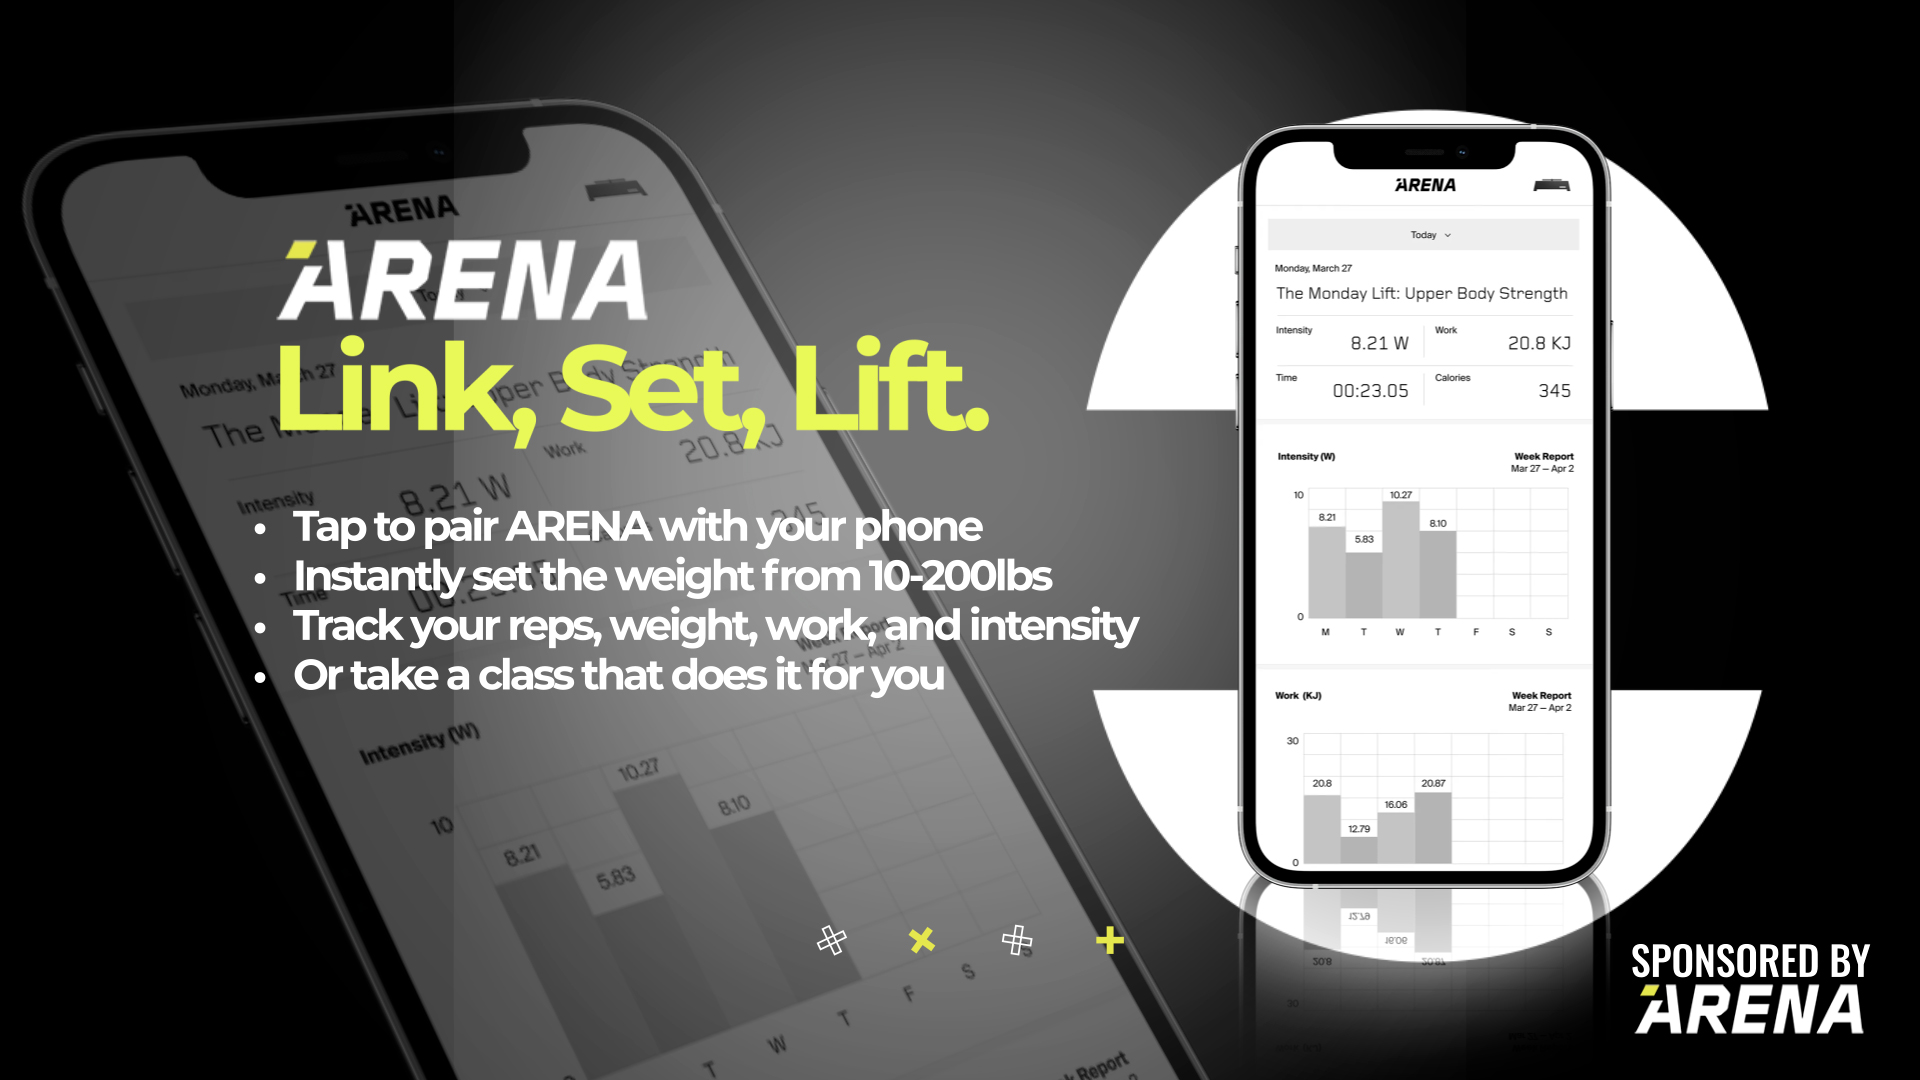 A grey, black, and white image shows a phone preview of the ARENA app.